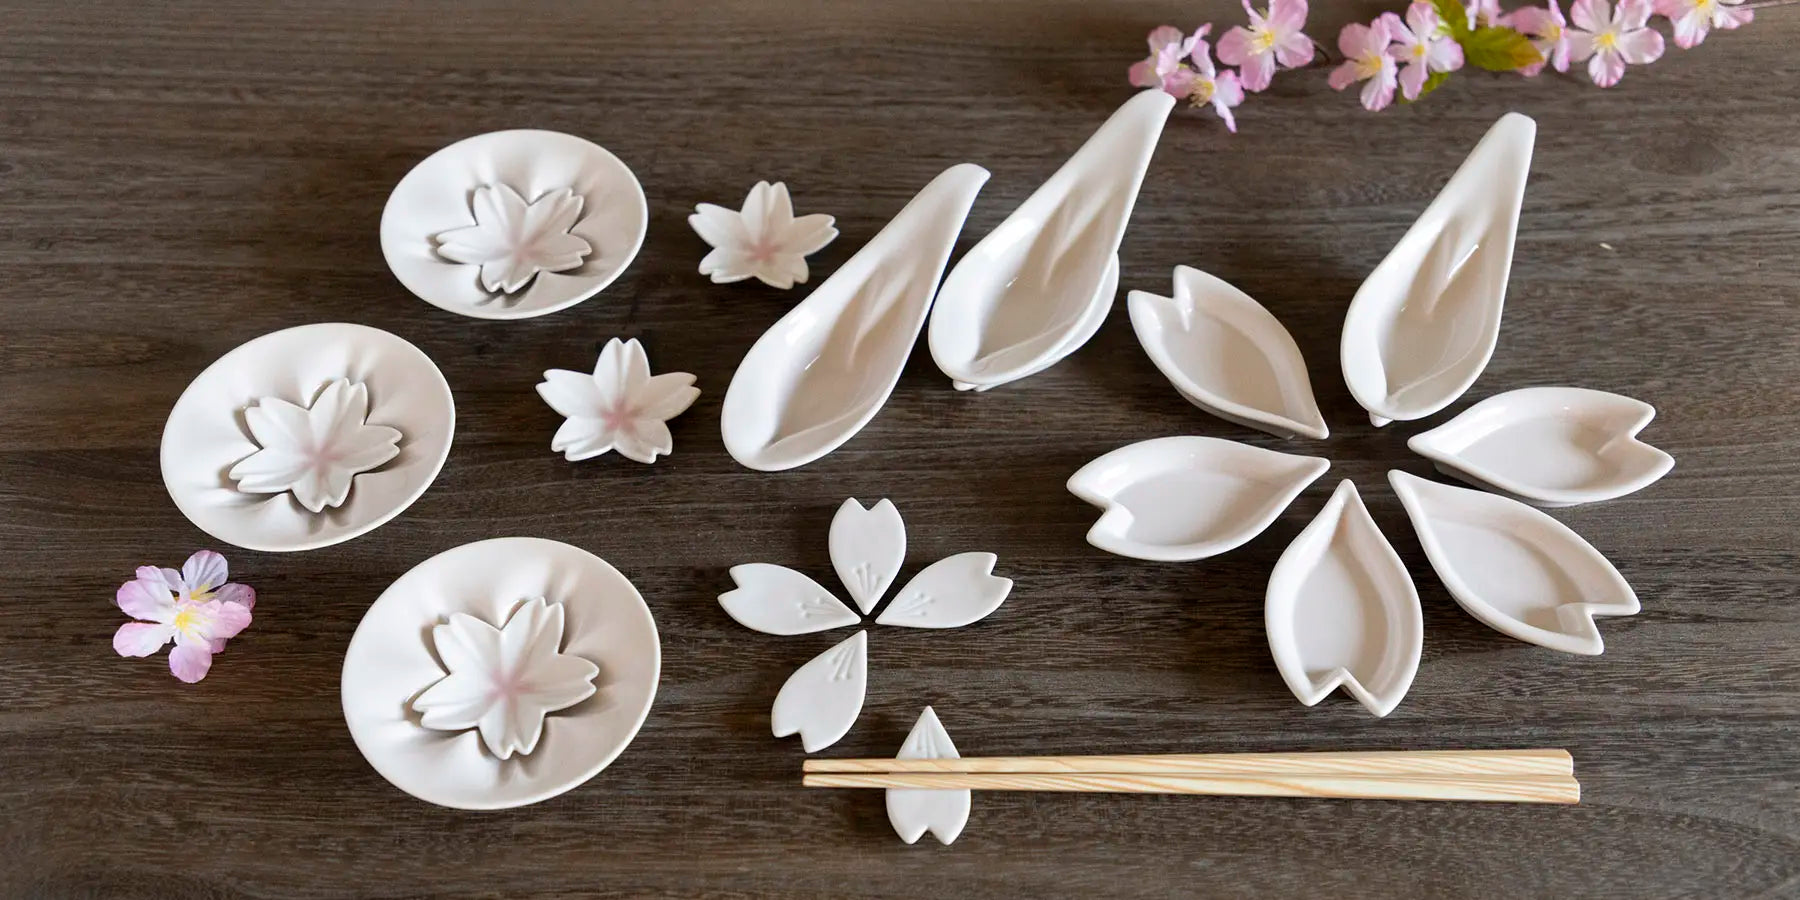 Discover our great selection of Sakura at Globalkitchen Japan.